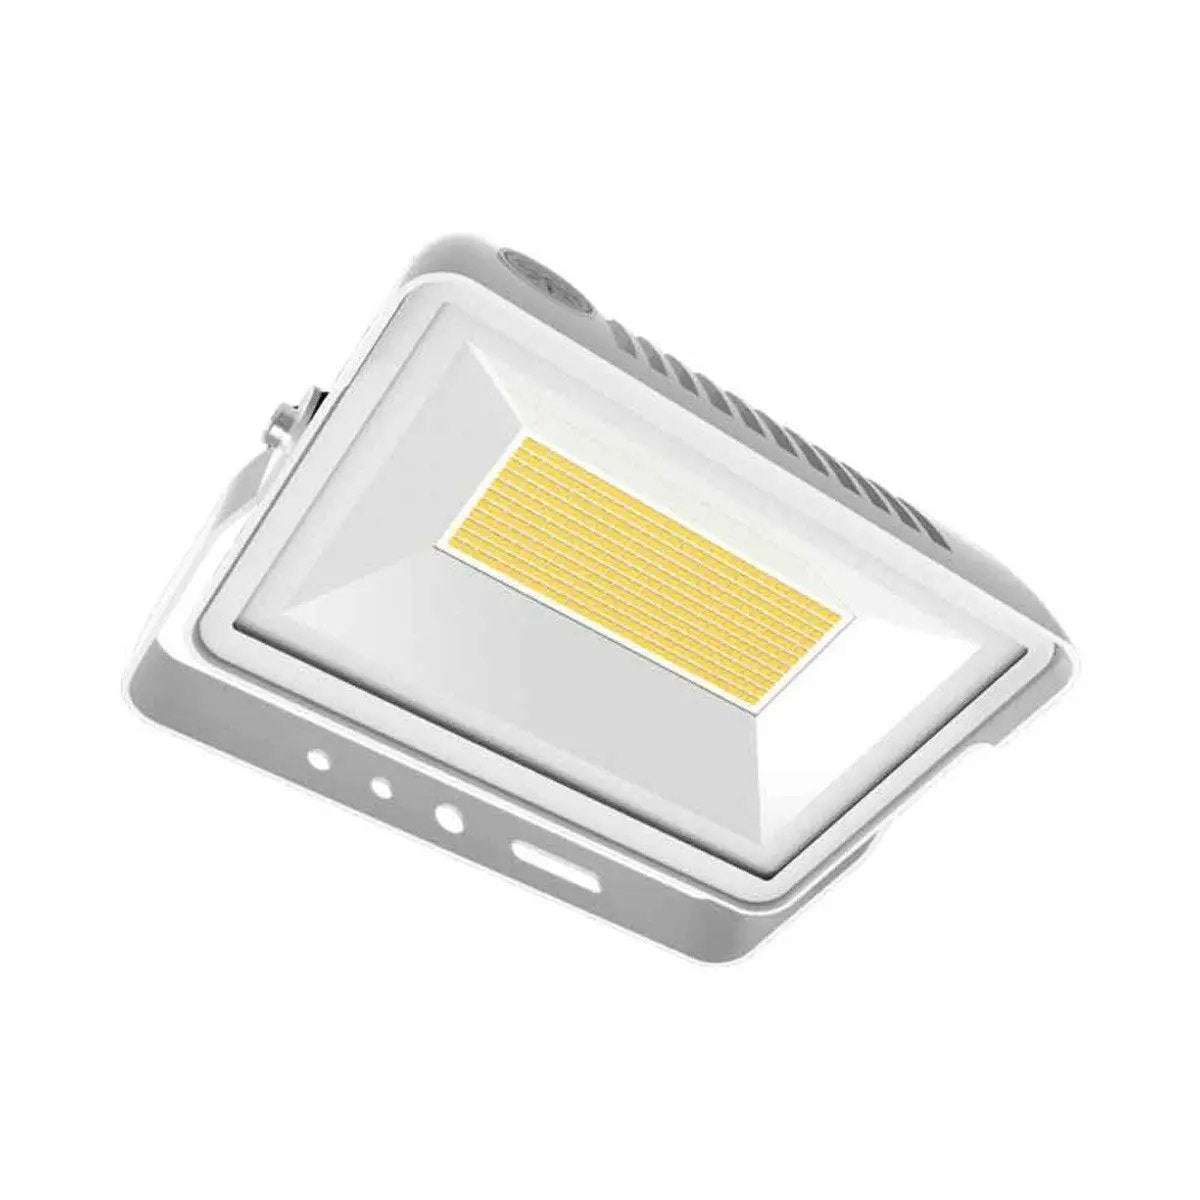 Waterproof Outdoor Flood Light with color adjustable white light, universal mounting options, and built-in photocell for energy savings.